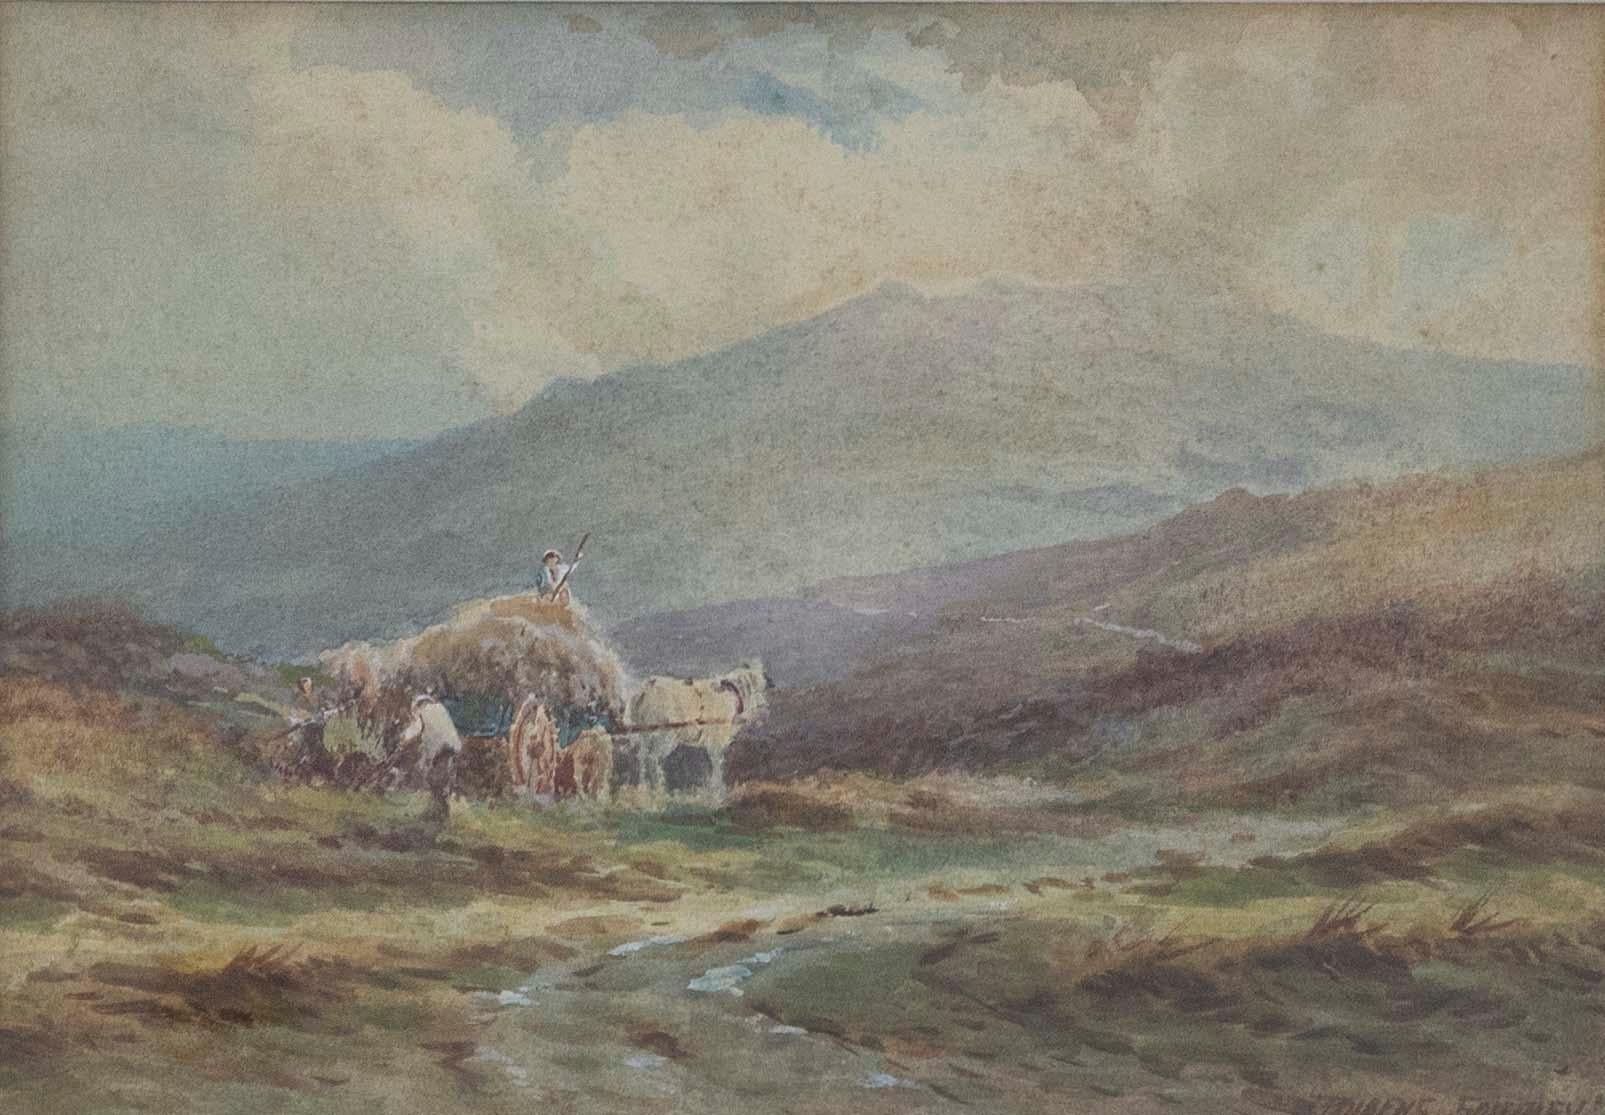 A charming watercolour scene depicting farmers piling hay onto a cart before mountains. The artist uses a delicate touch to capture the fine mist on the mountain tops, making for an atmospheric landscape. Signed to the lower right. Presented in a